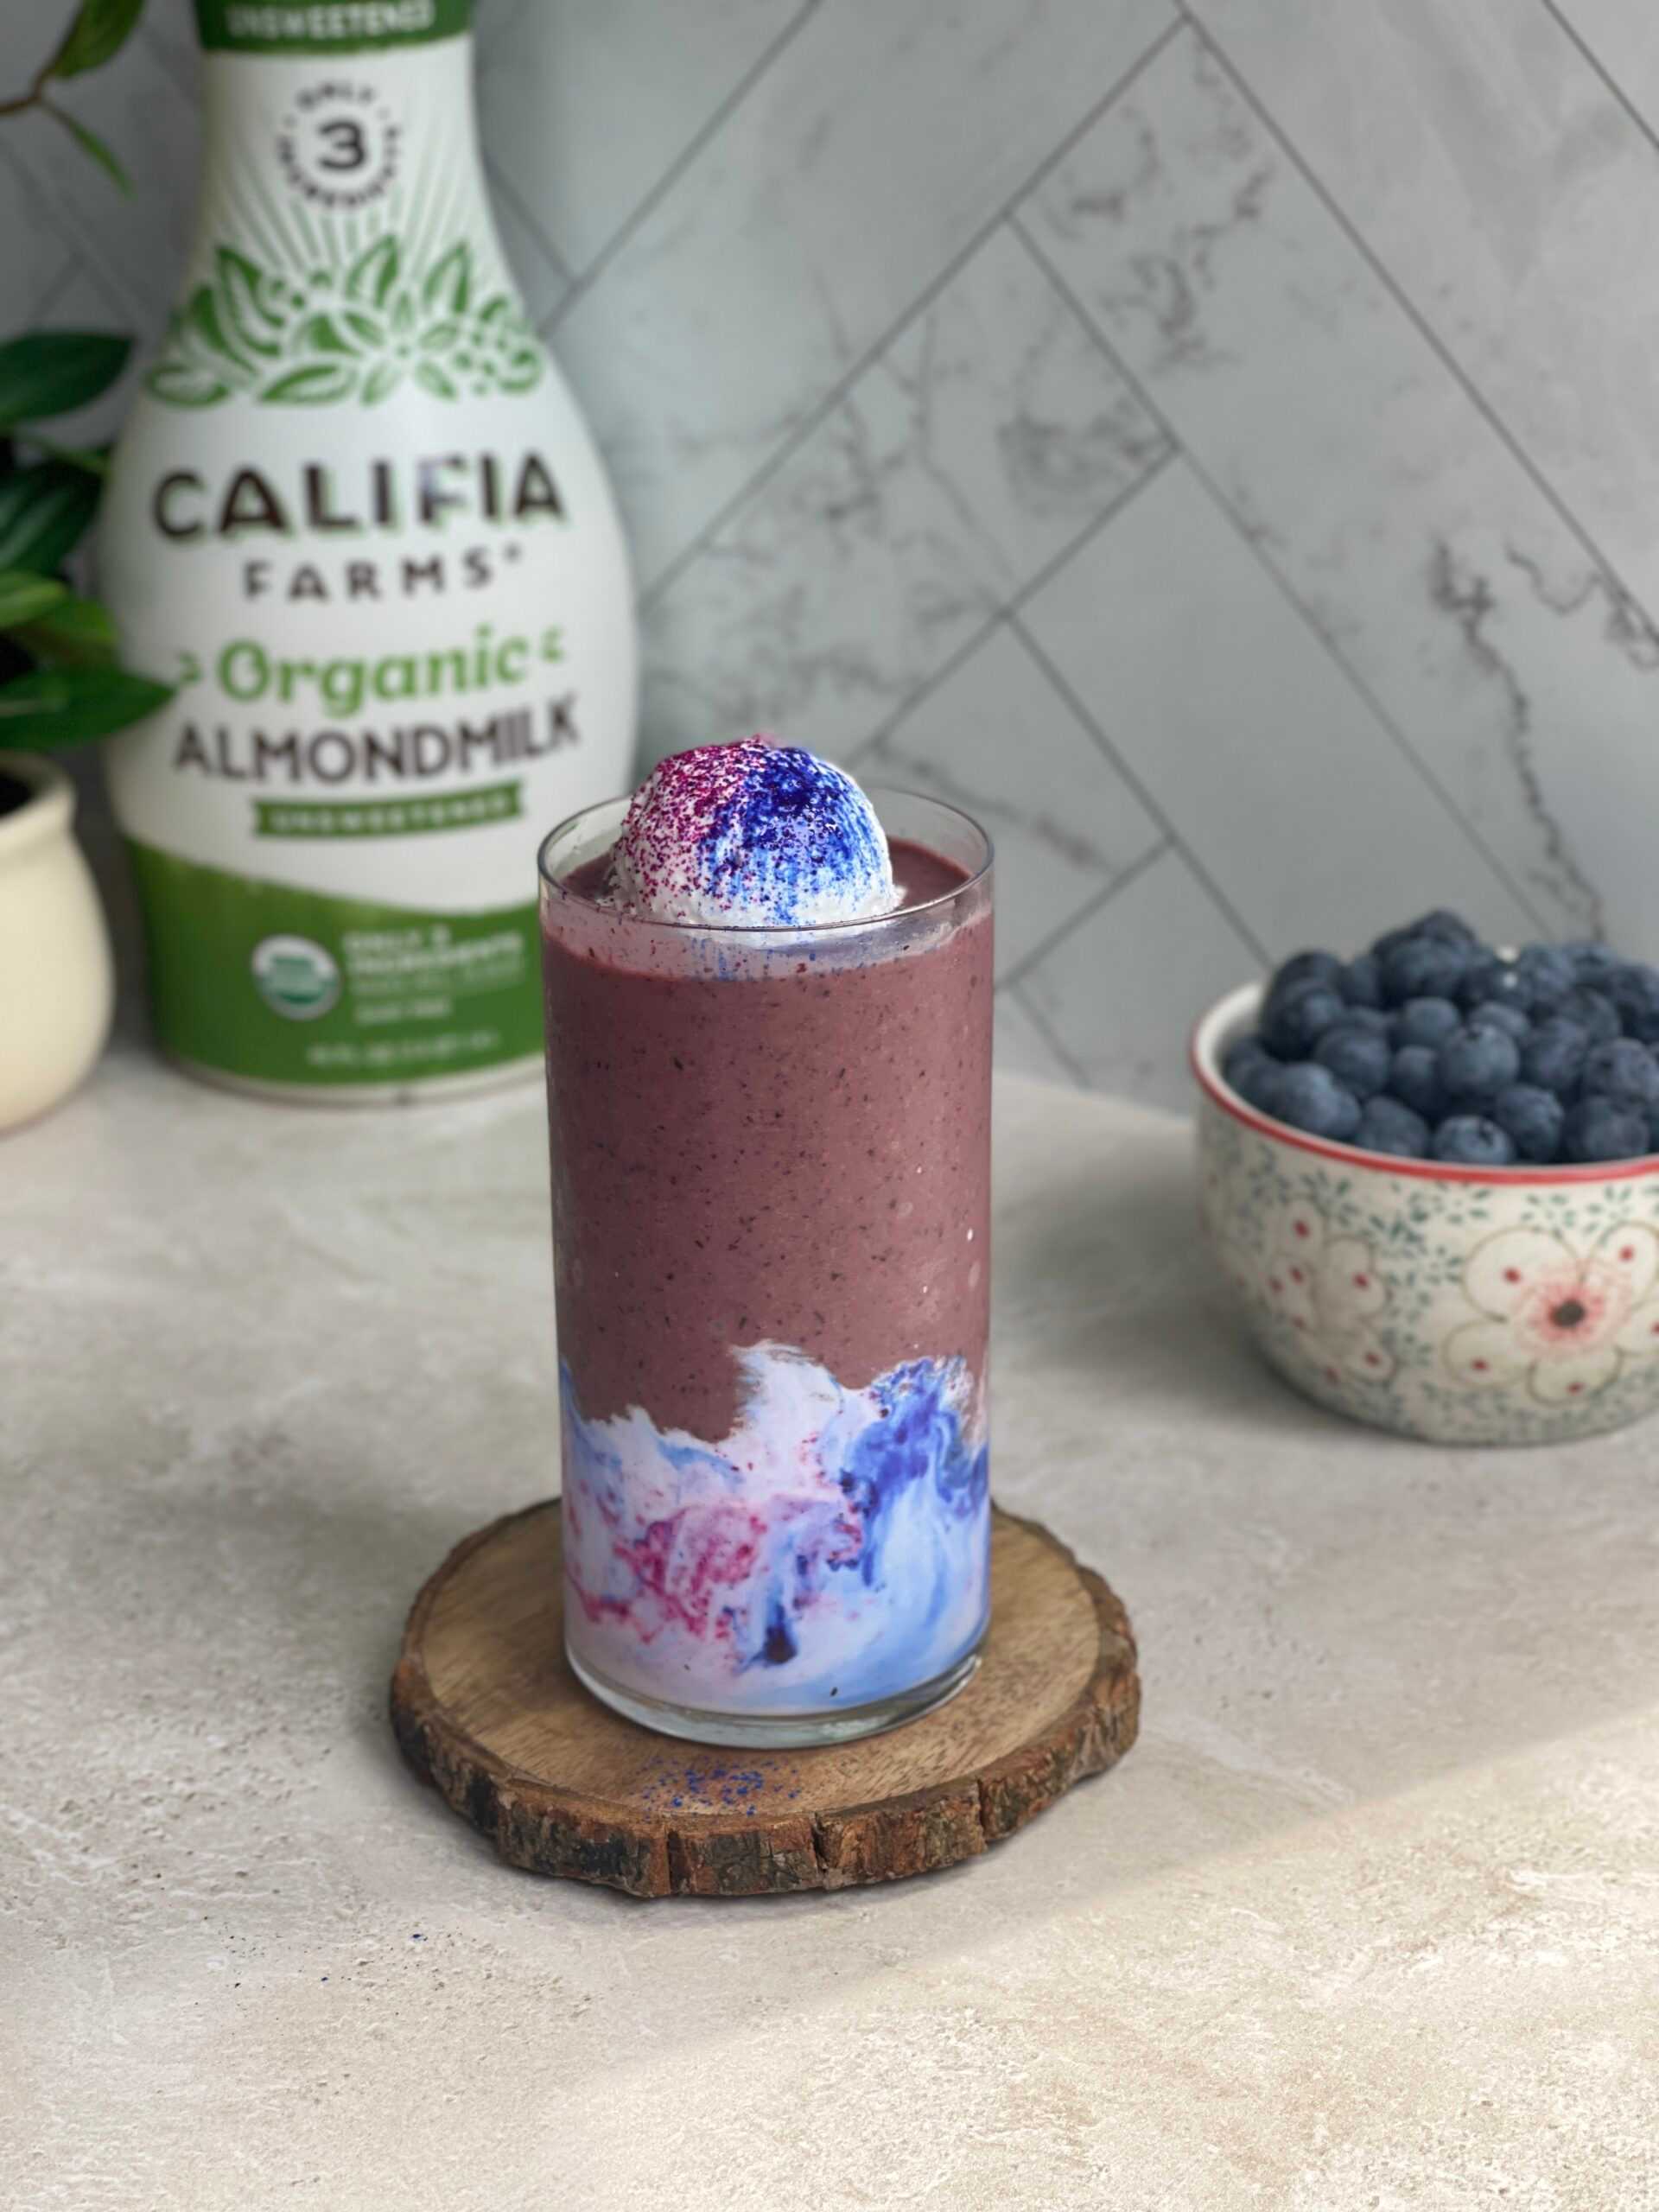 A purple smoothie sits at the center of the image, with Califia Farms Organic Almondmilk in the background.